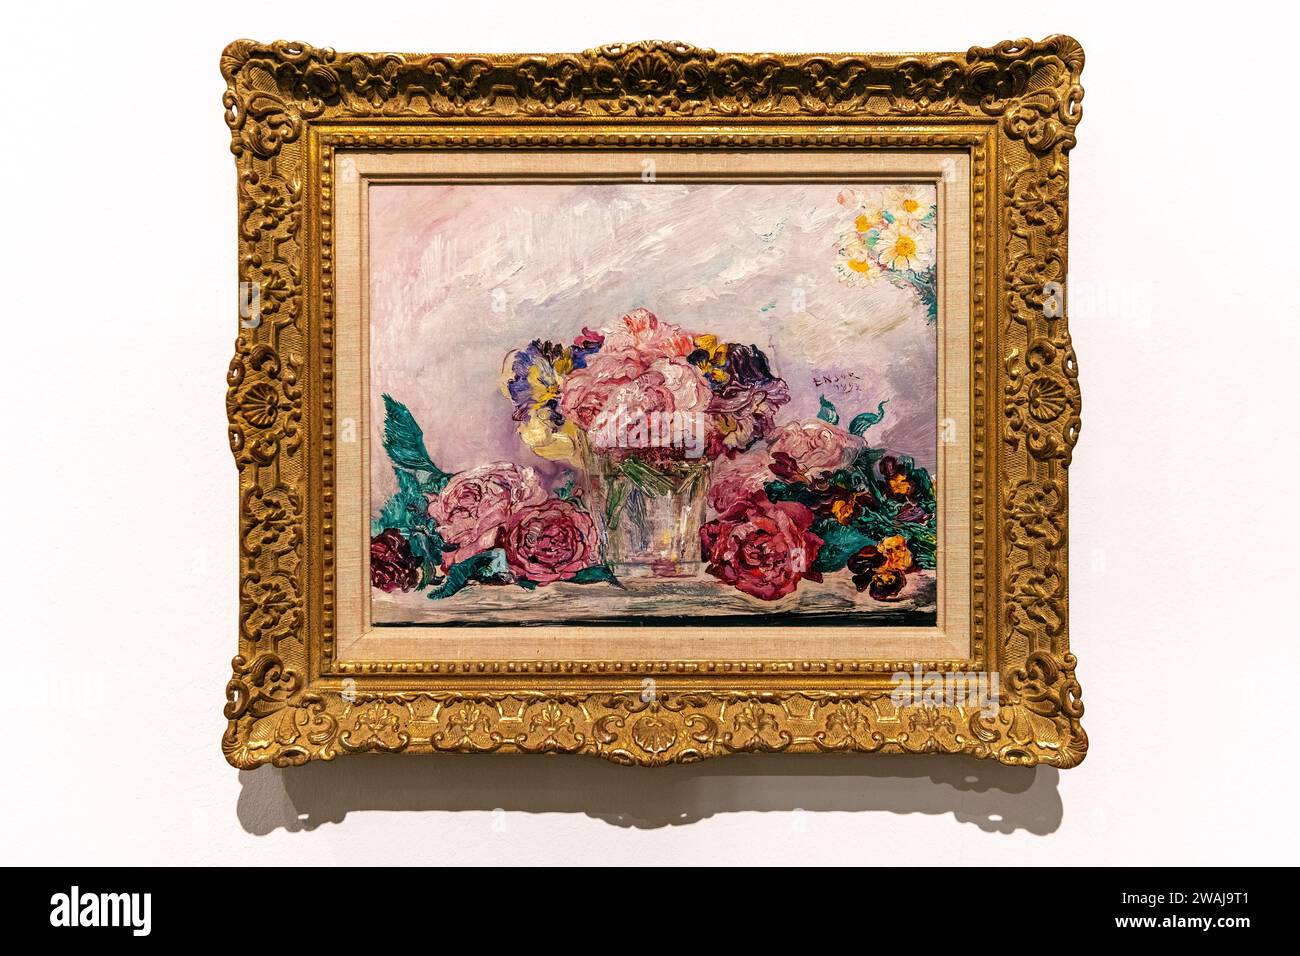 Roses, still life painting by James Ensor, 1892, Oostende, Belgium. Stock Photo